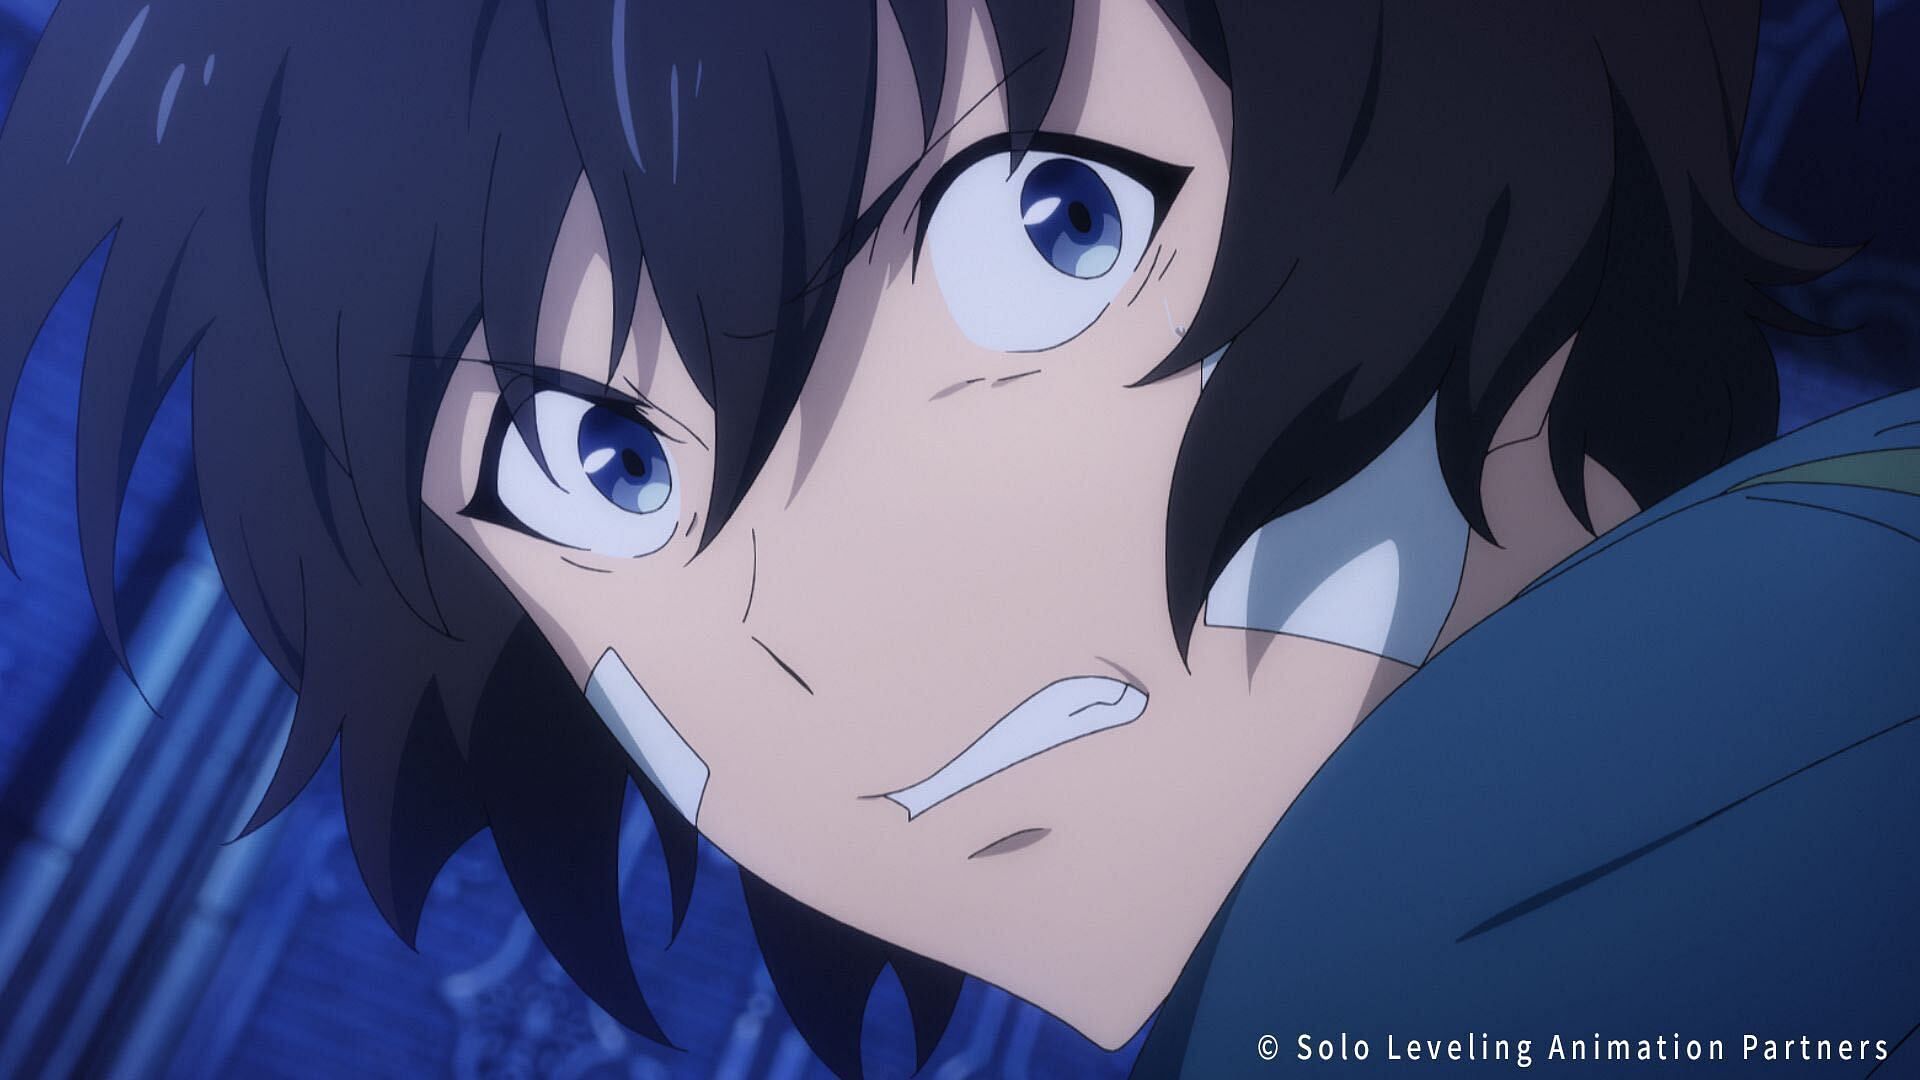 Sung Jinwoo as seen in Solo Leveling anime (Image via A-1 Pictures)